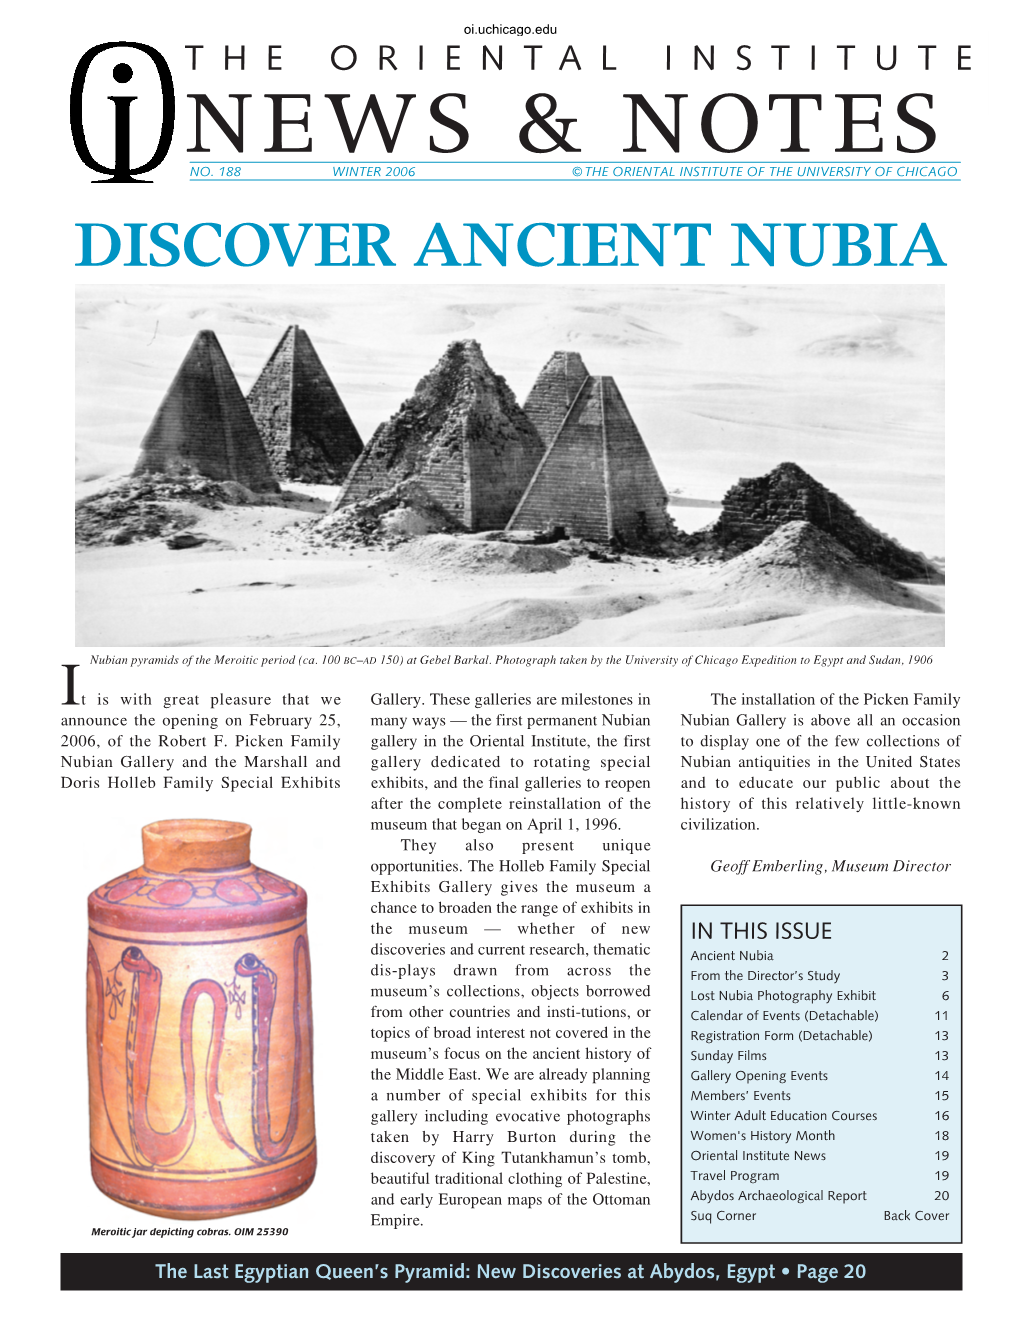 Discover Ancient Nubia